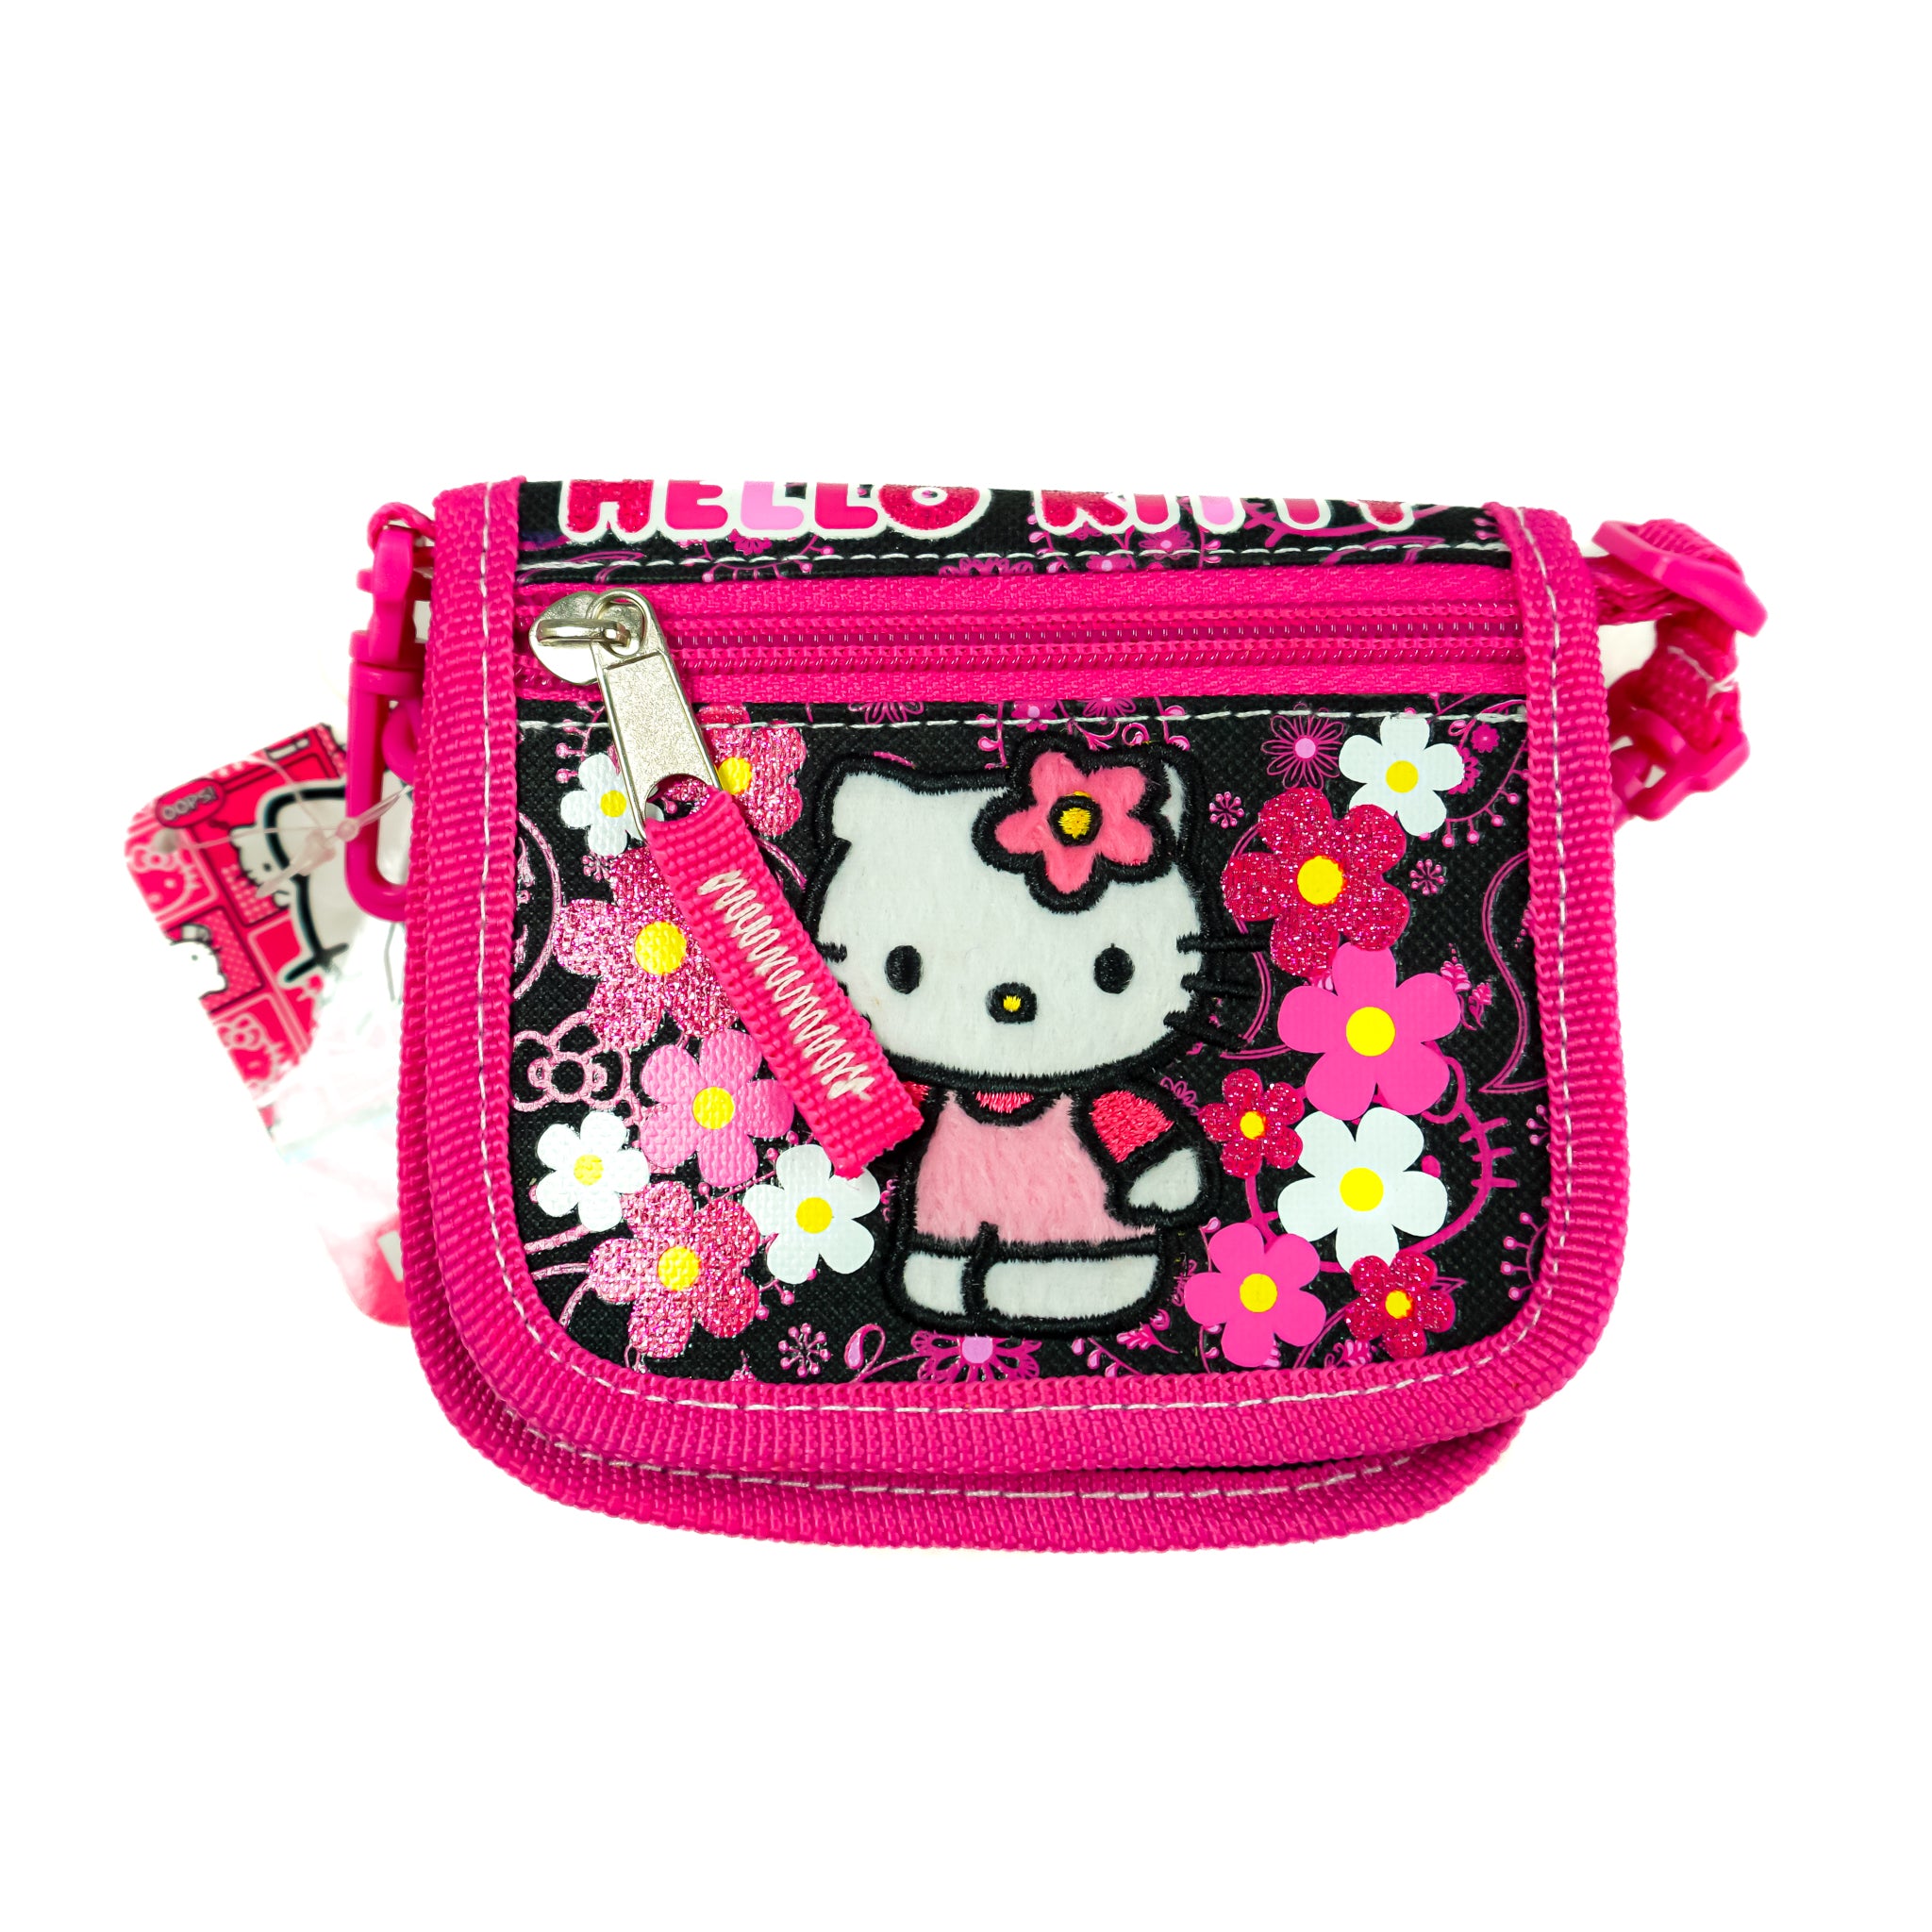 25 Best Hello Kitty Toys & Products in 2018 - Cute Hello Kitty Merchandise